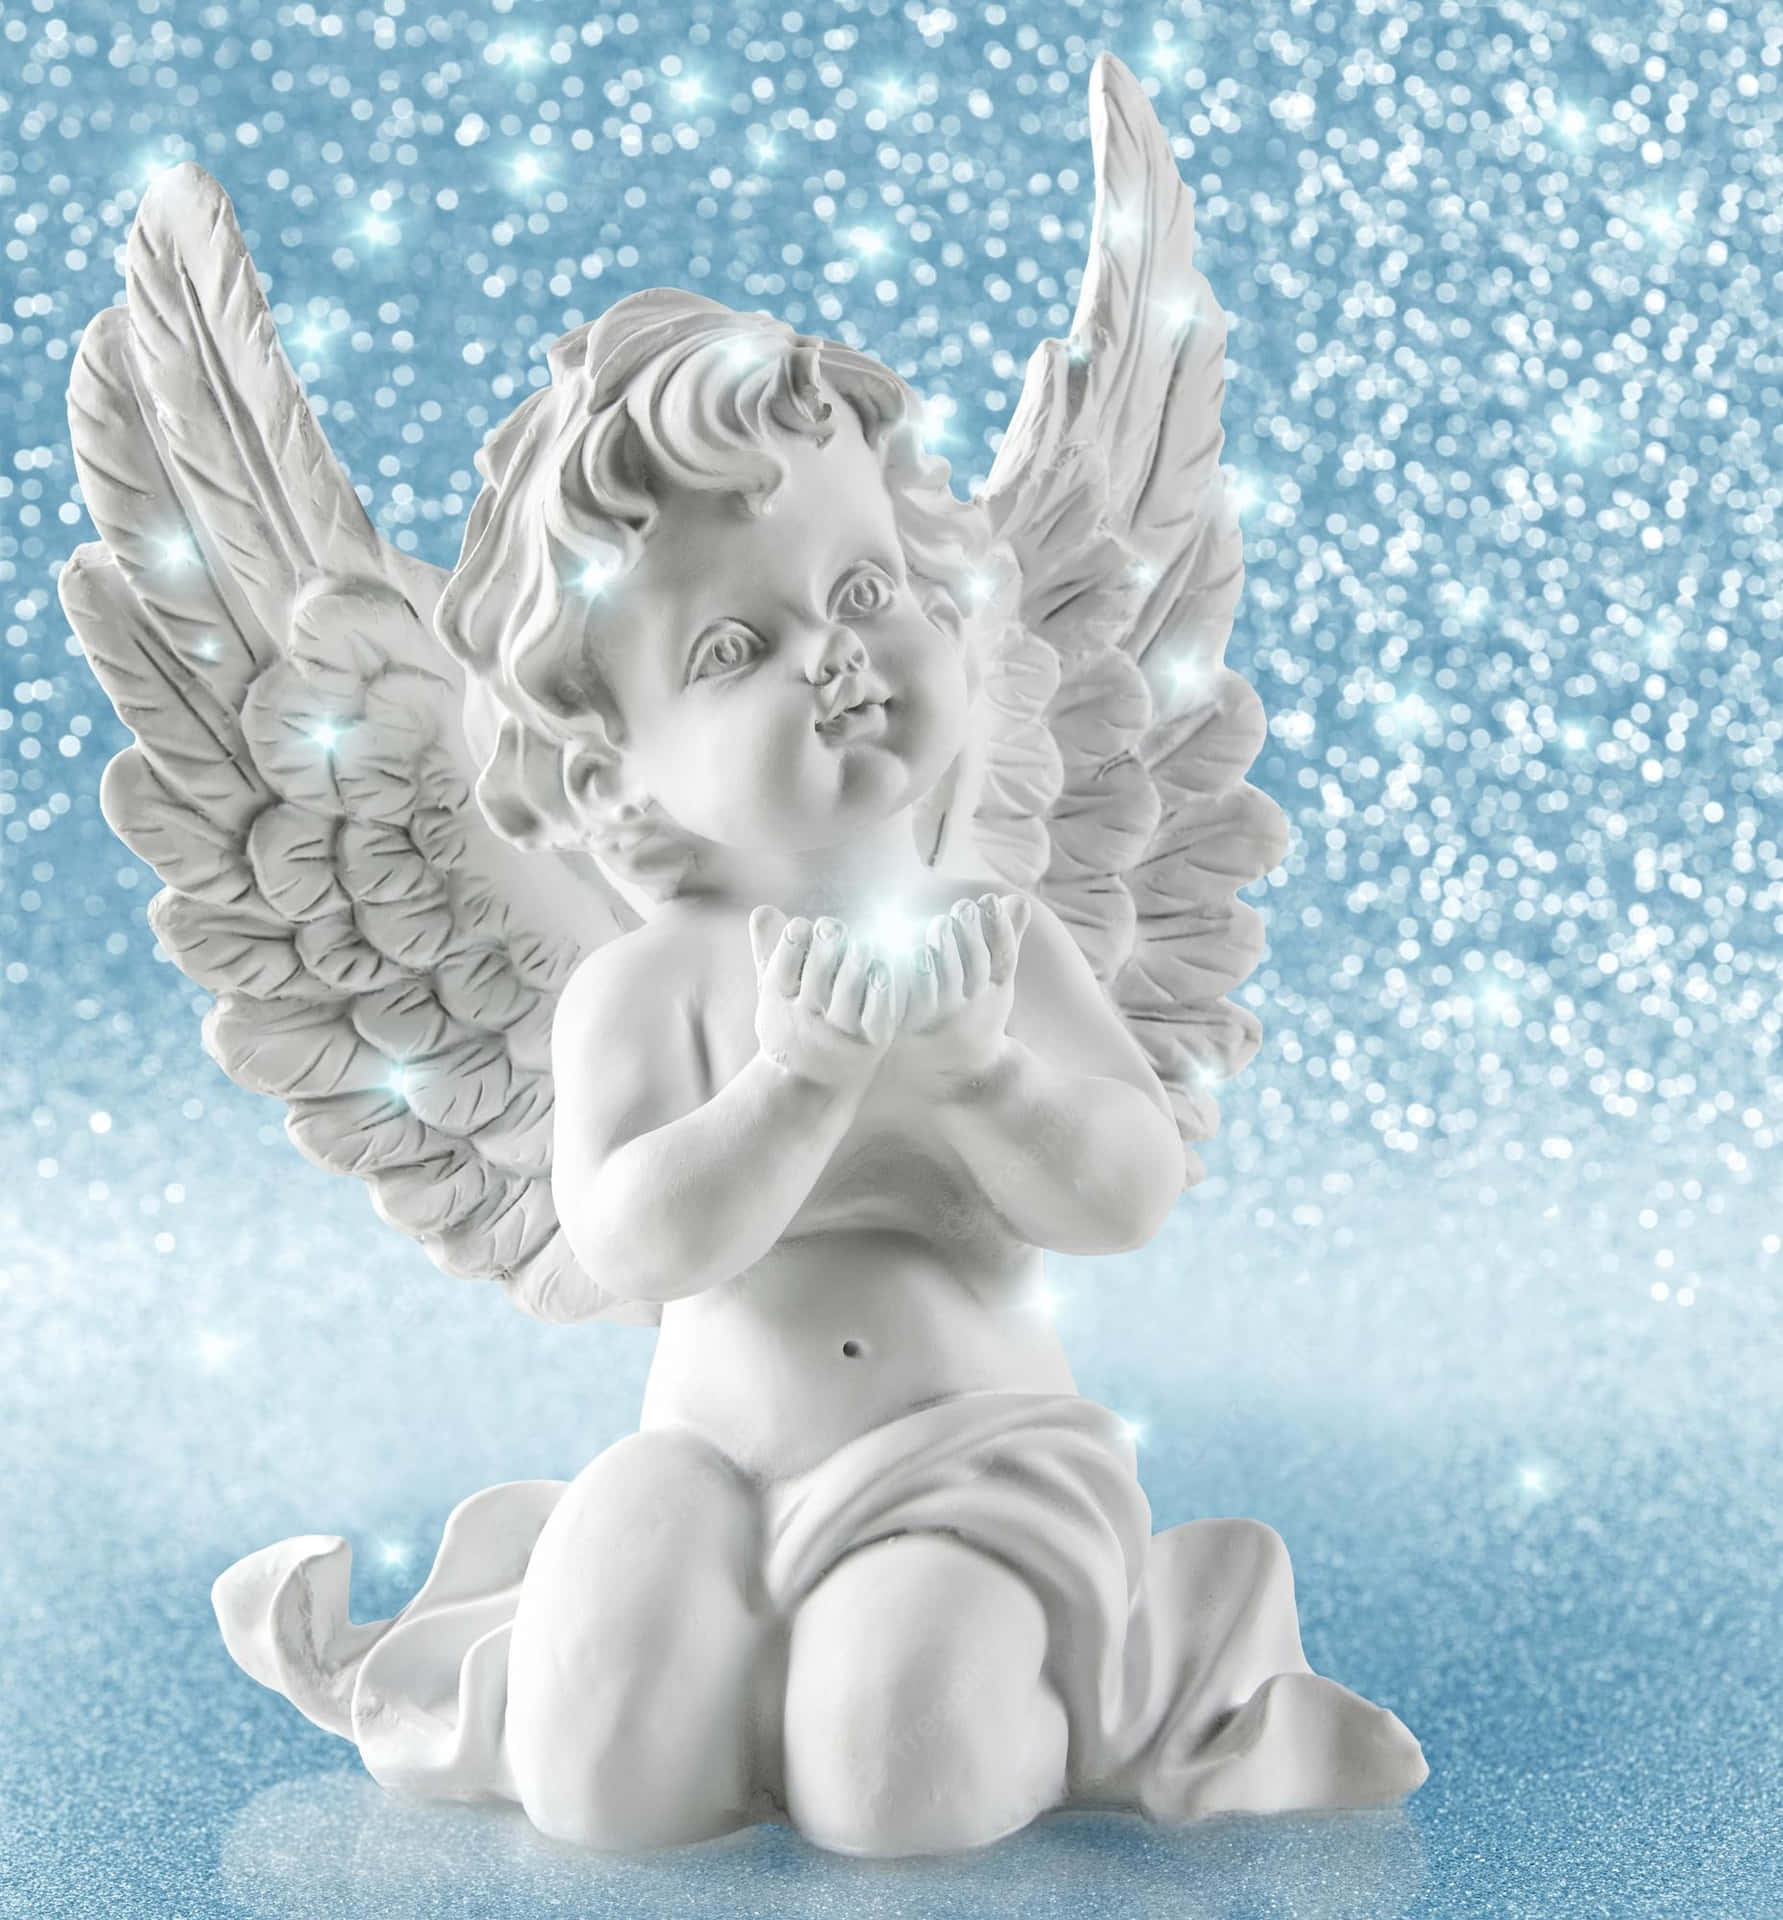 A White Angel Figurine Is Sitting On A Blue Background Wallpaper